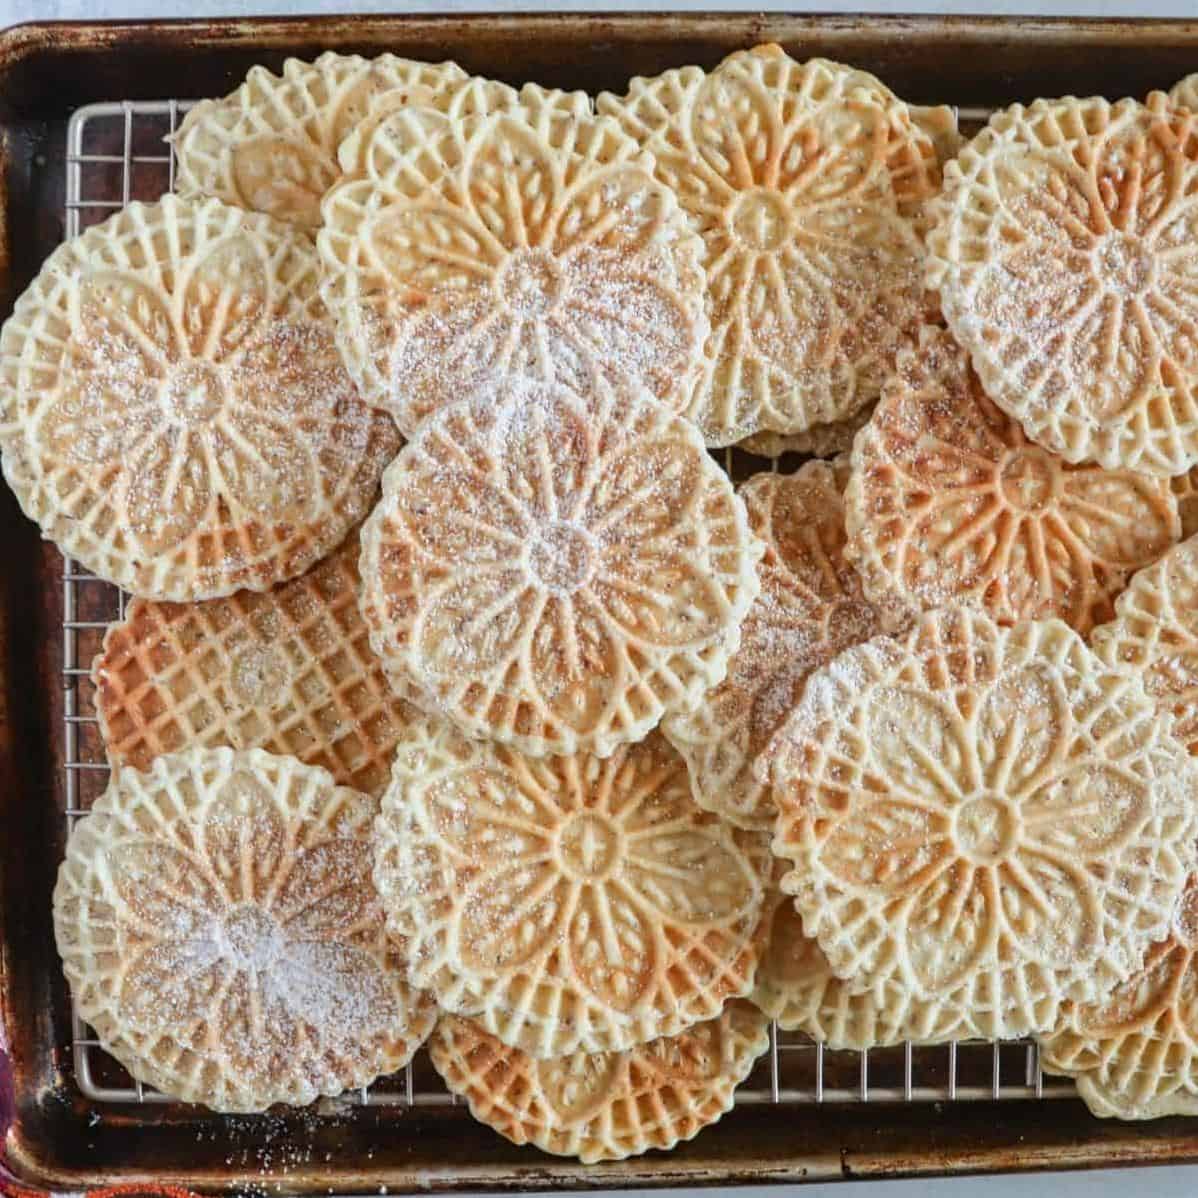  Serve up some love with these heart-shaped Pizzelle cookies